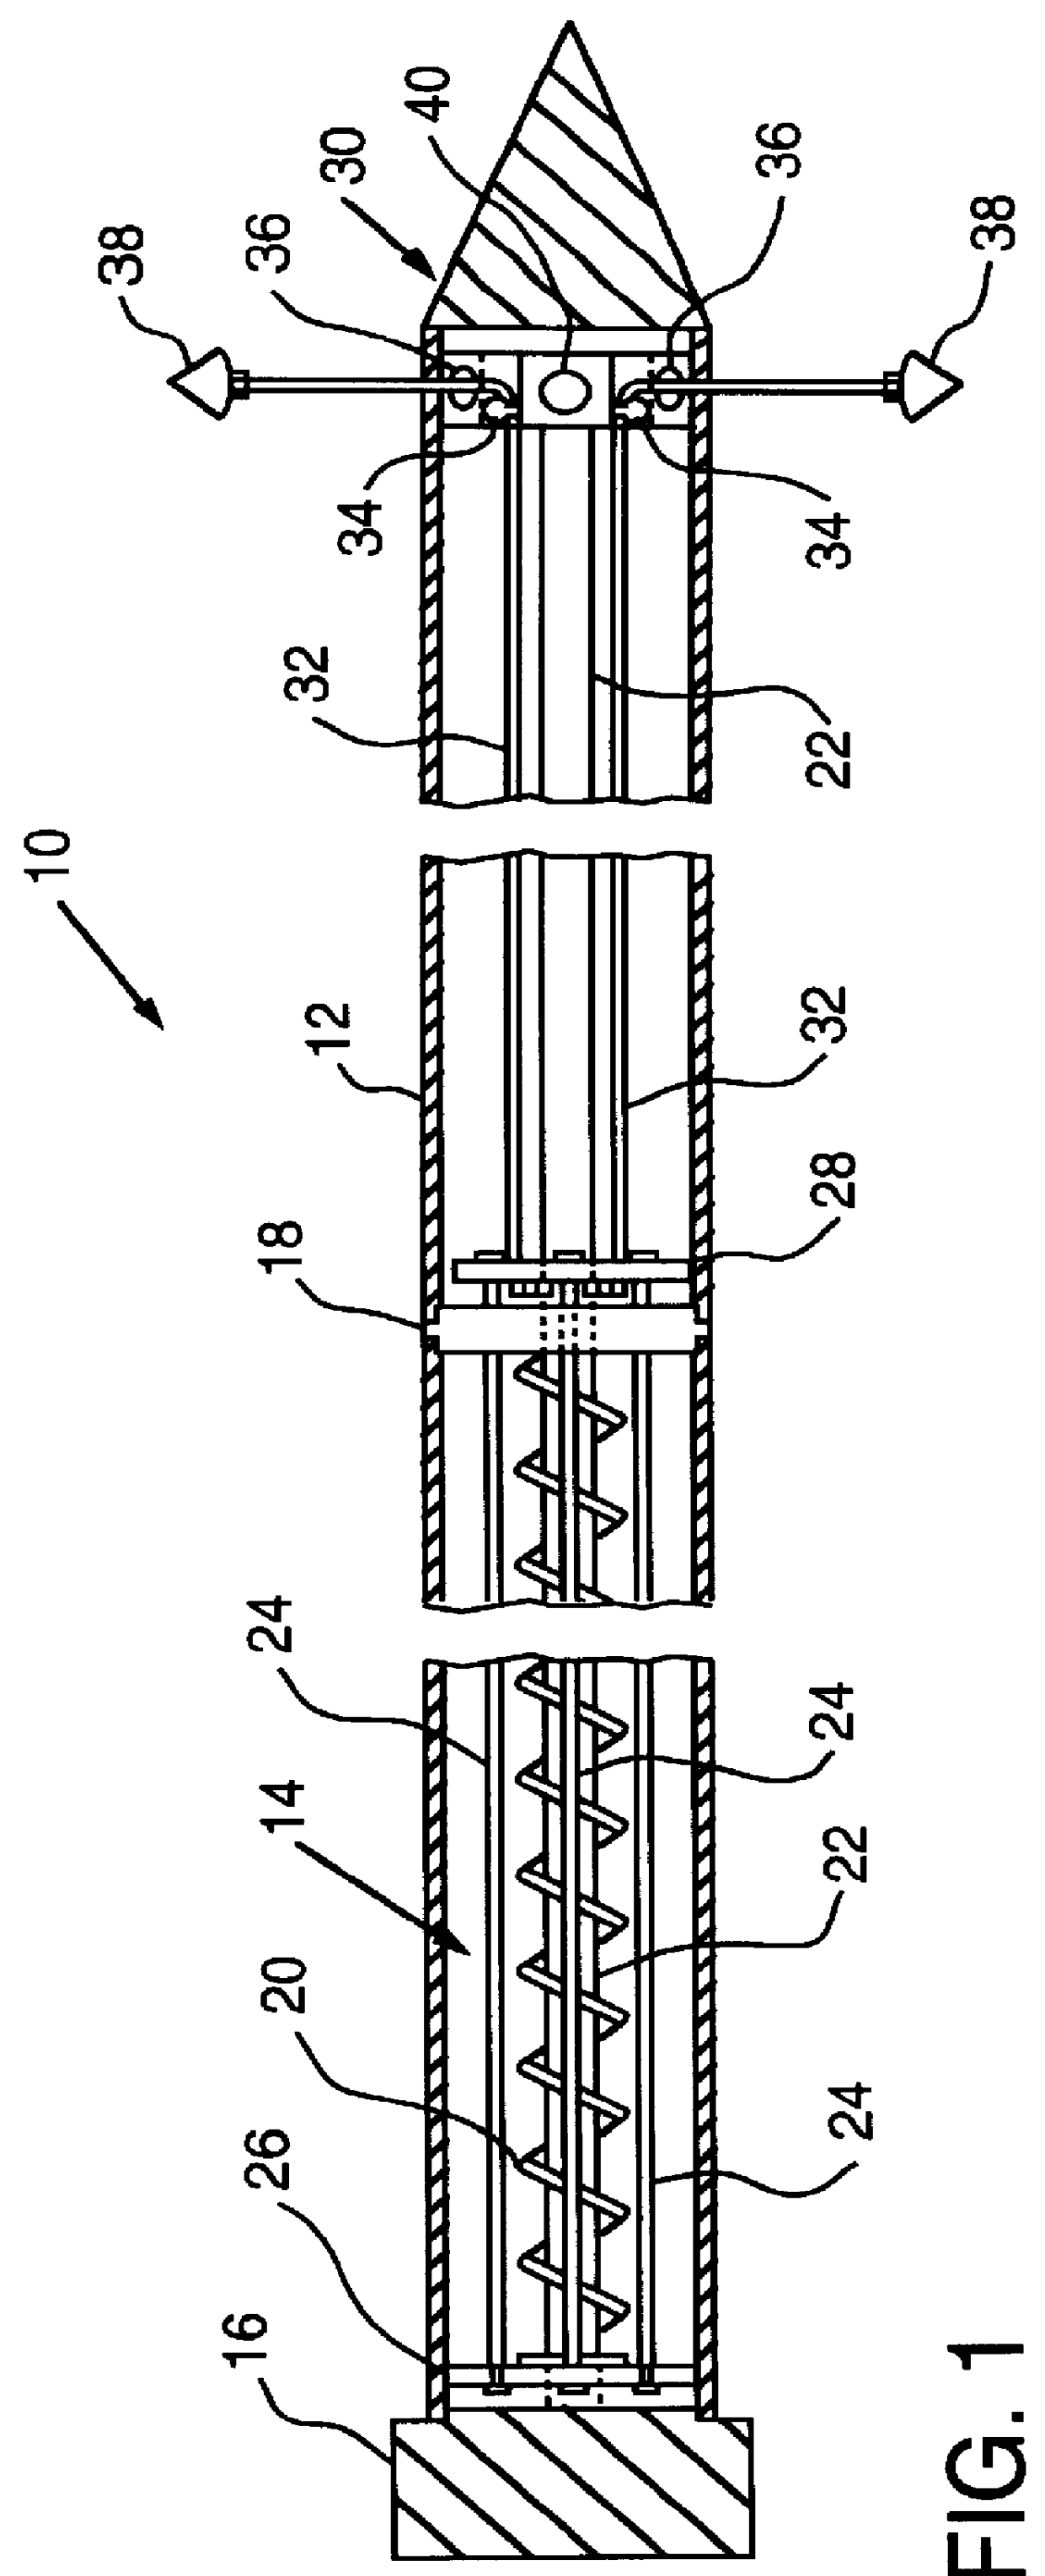 Method and apparatus for rotary mining